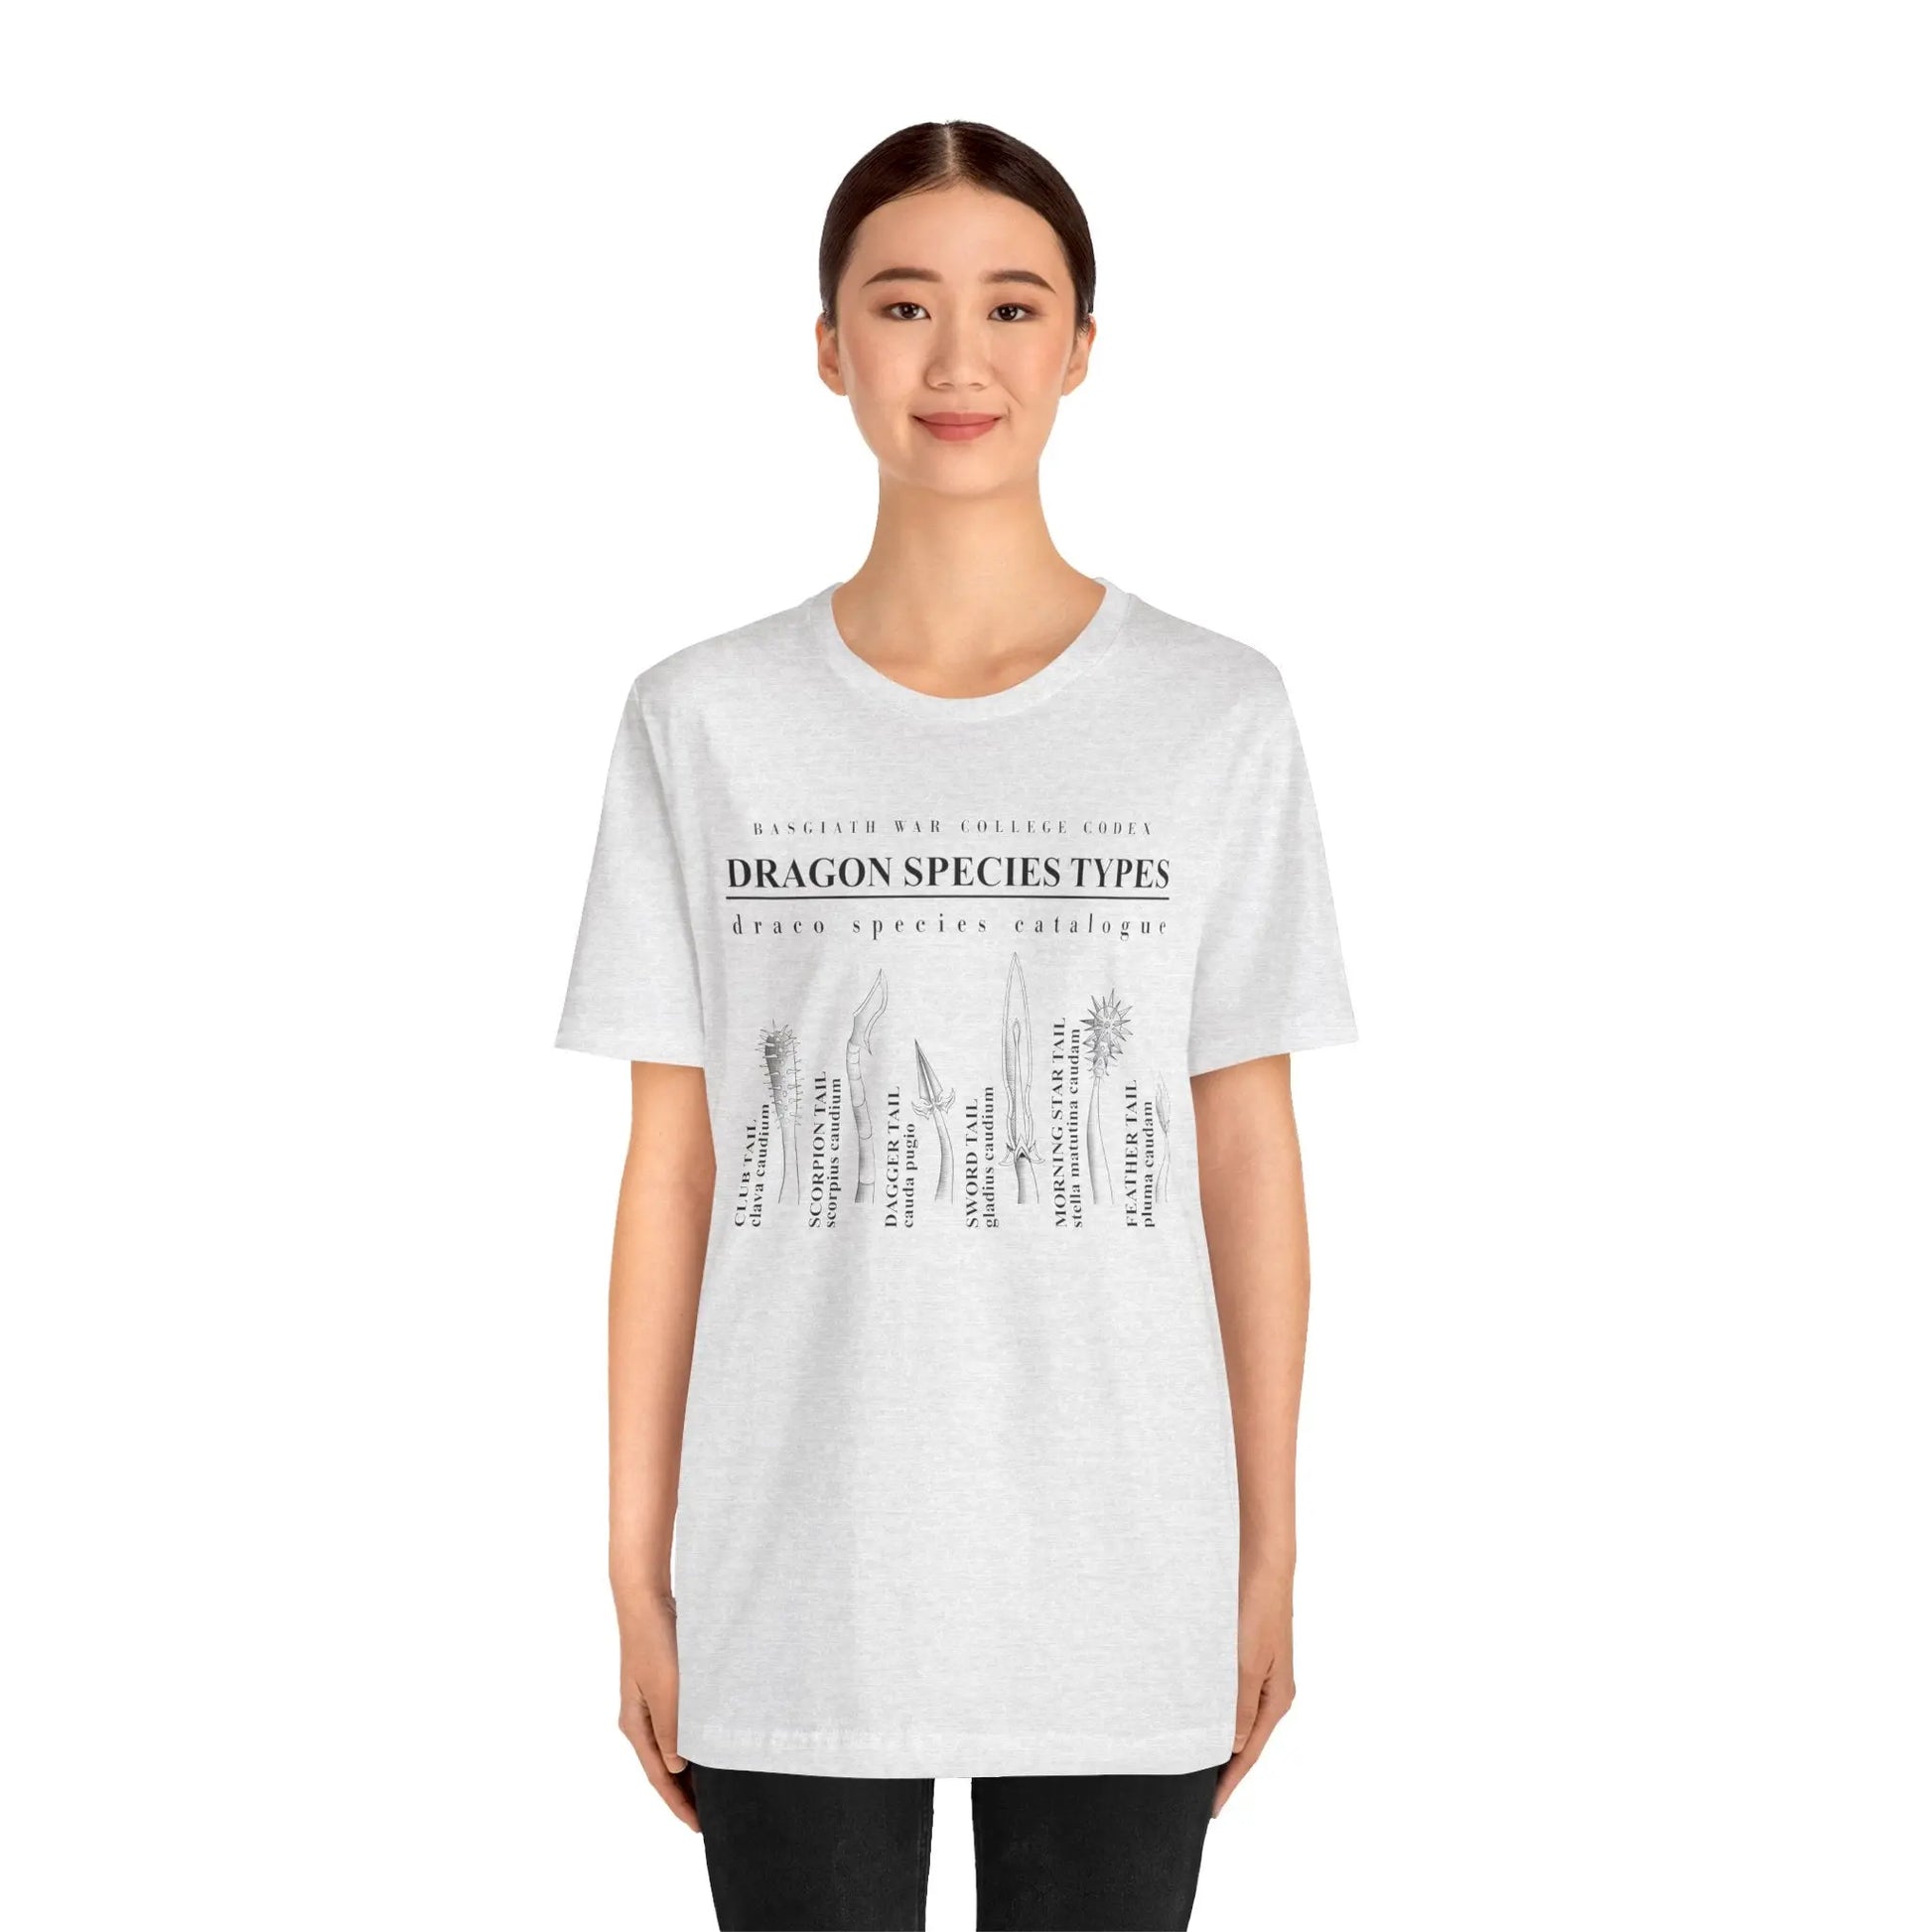 Onyx Storm Fourth Wing Iron Flame Basgiath War College Codex of Dragon Species T-Shirt | Inspired by Rebecca Yarros Bookish Gifts BookTok Bibliophile Printify